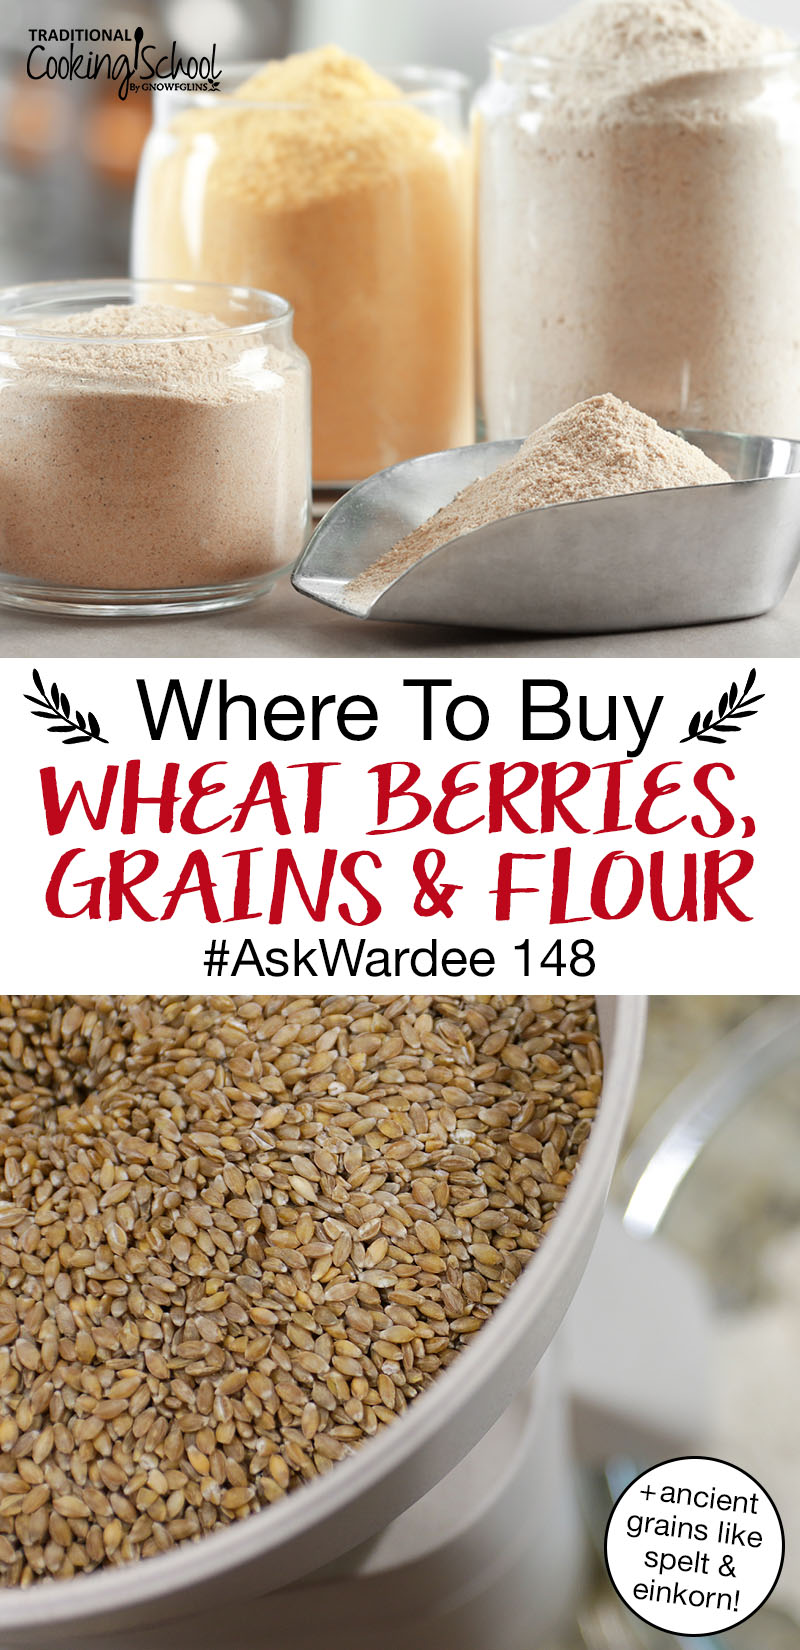 photo collage of whole grain flour and berries, with text overlay: "Where To Buy Wheat Berries, Grains & Flour #AskWardee 148 (+ancient grains like spelt & einkorn!)"